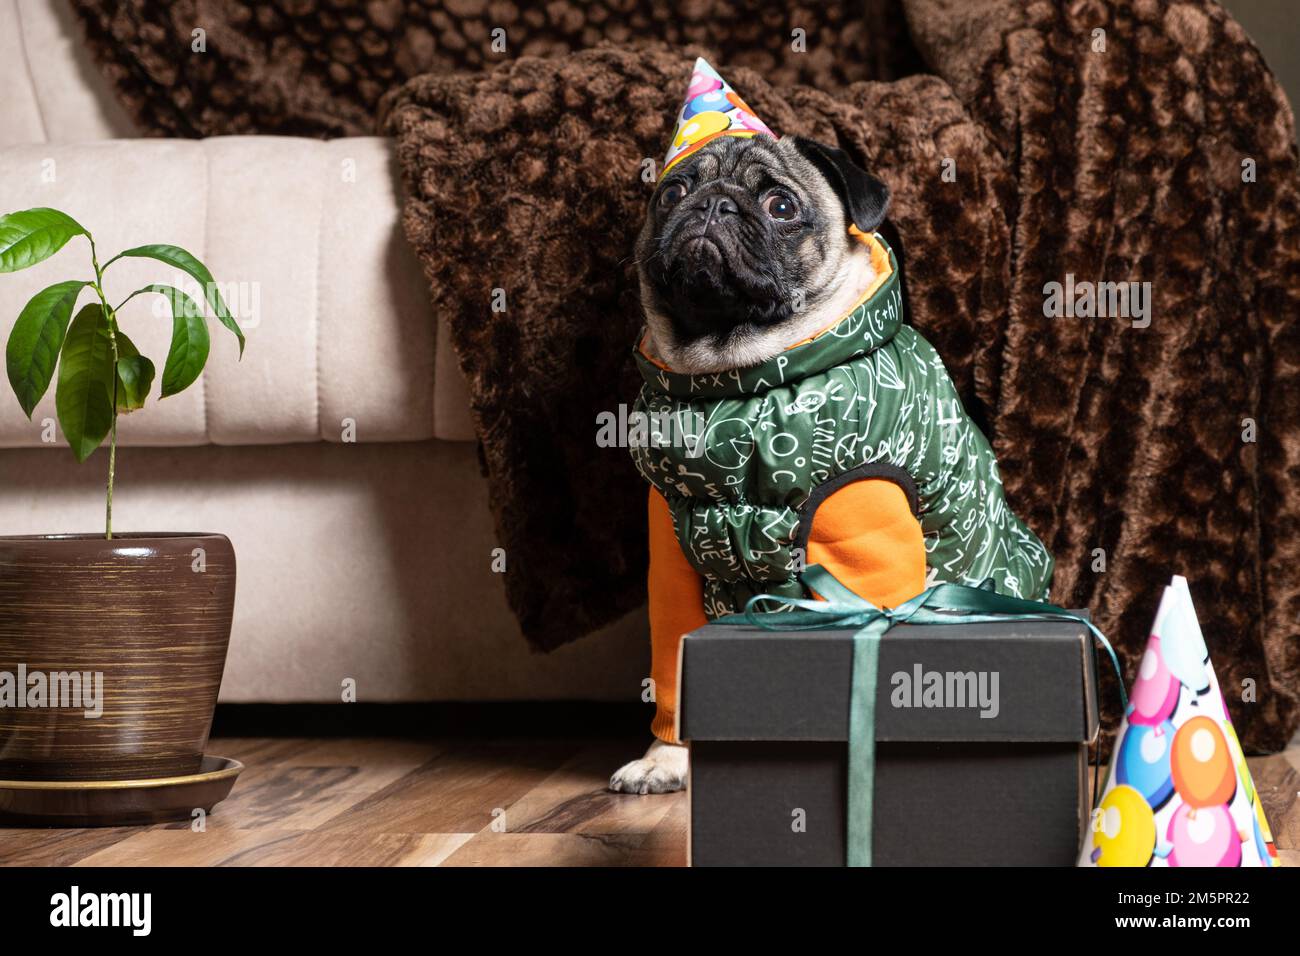 A little pug in a festive cap and costume sits near the gift, the pet celebrates its birthday. Stock Photo